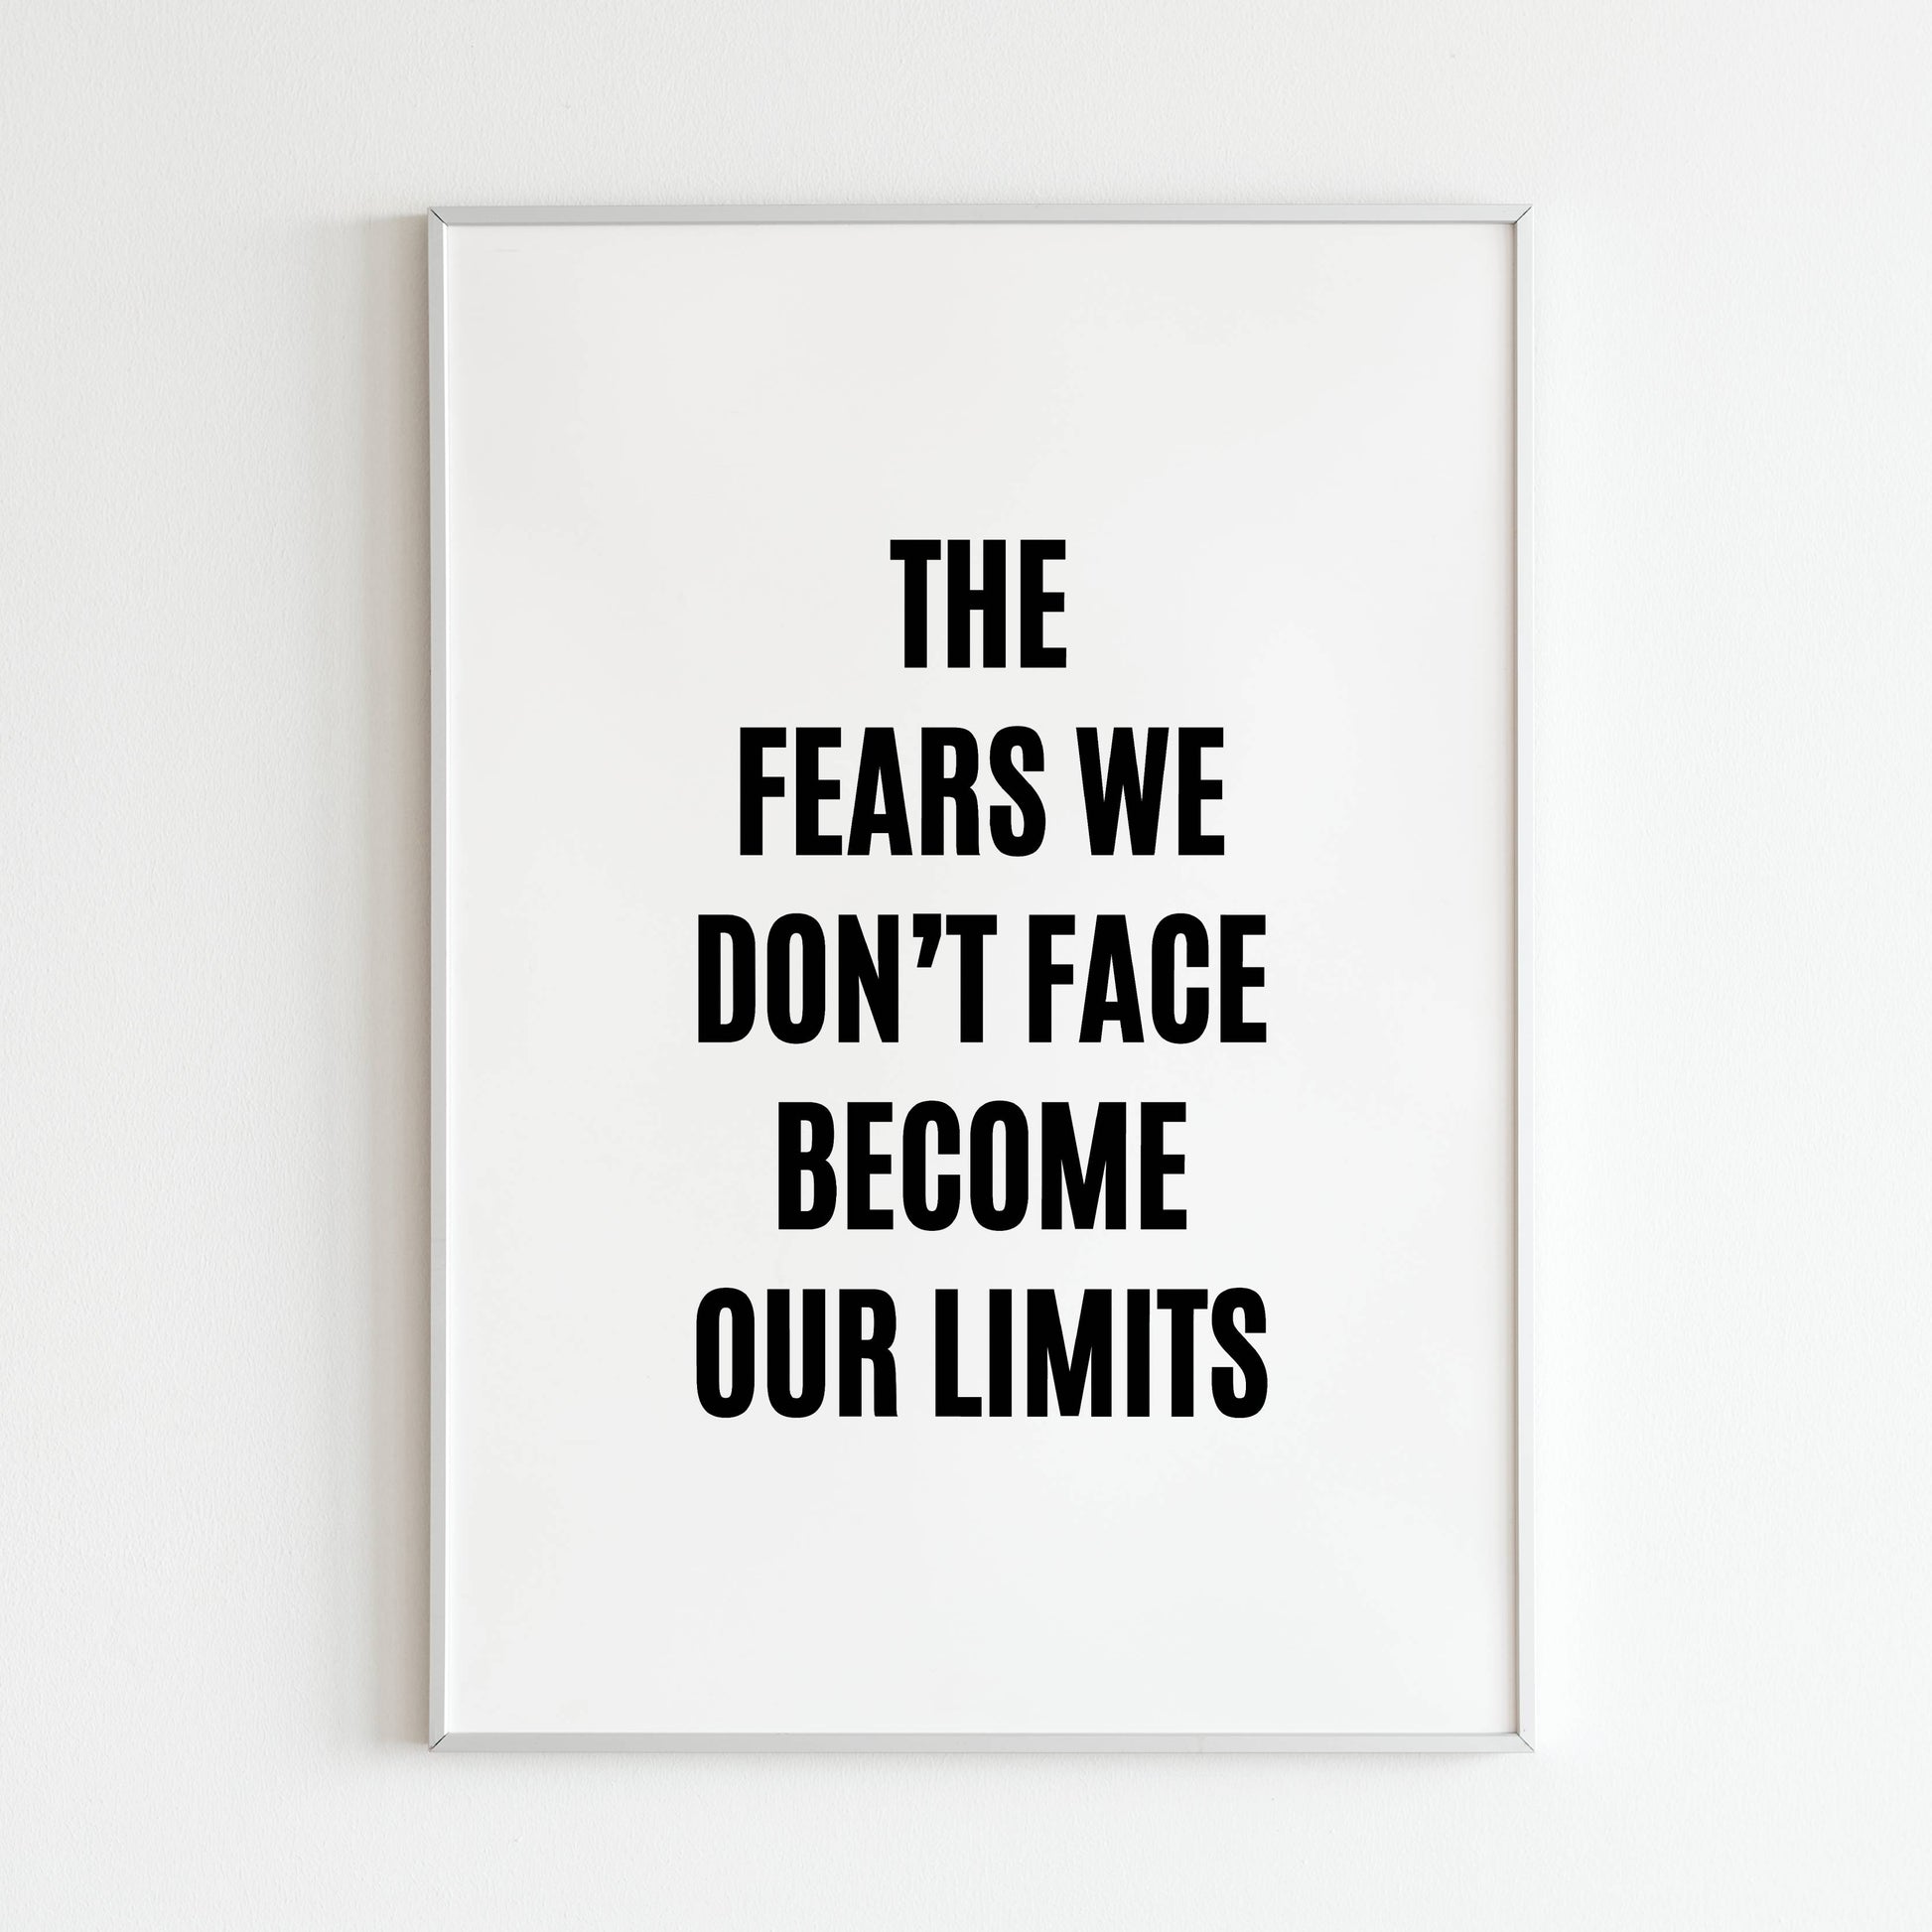 Downloadable inspirational wall art with a message of overcoming fears